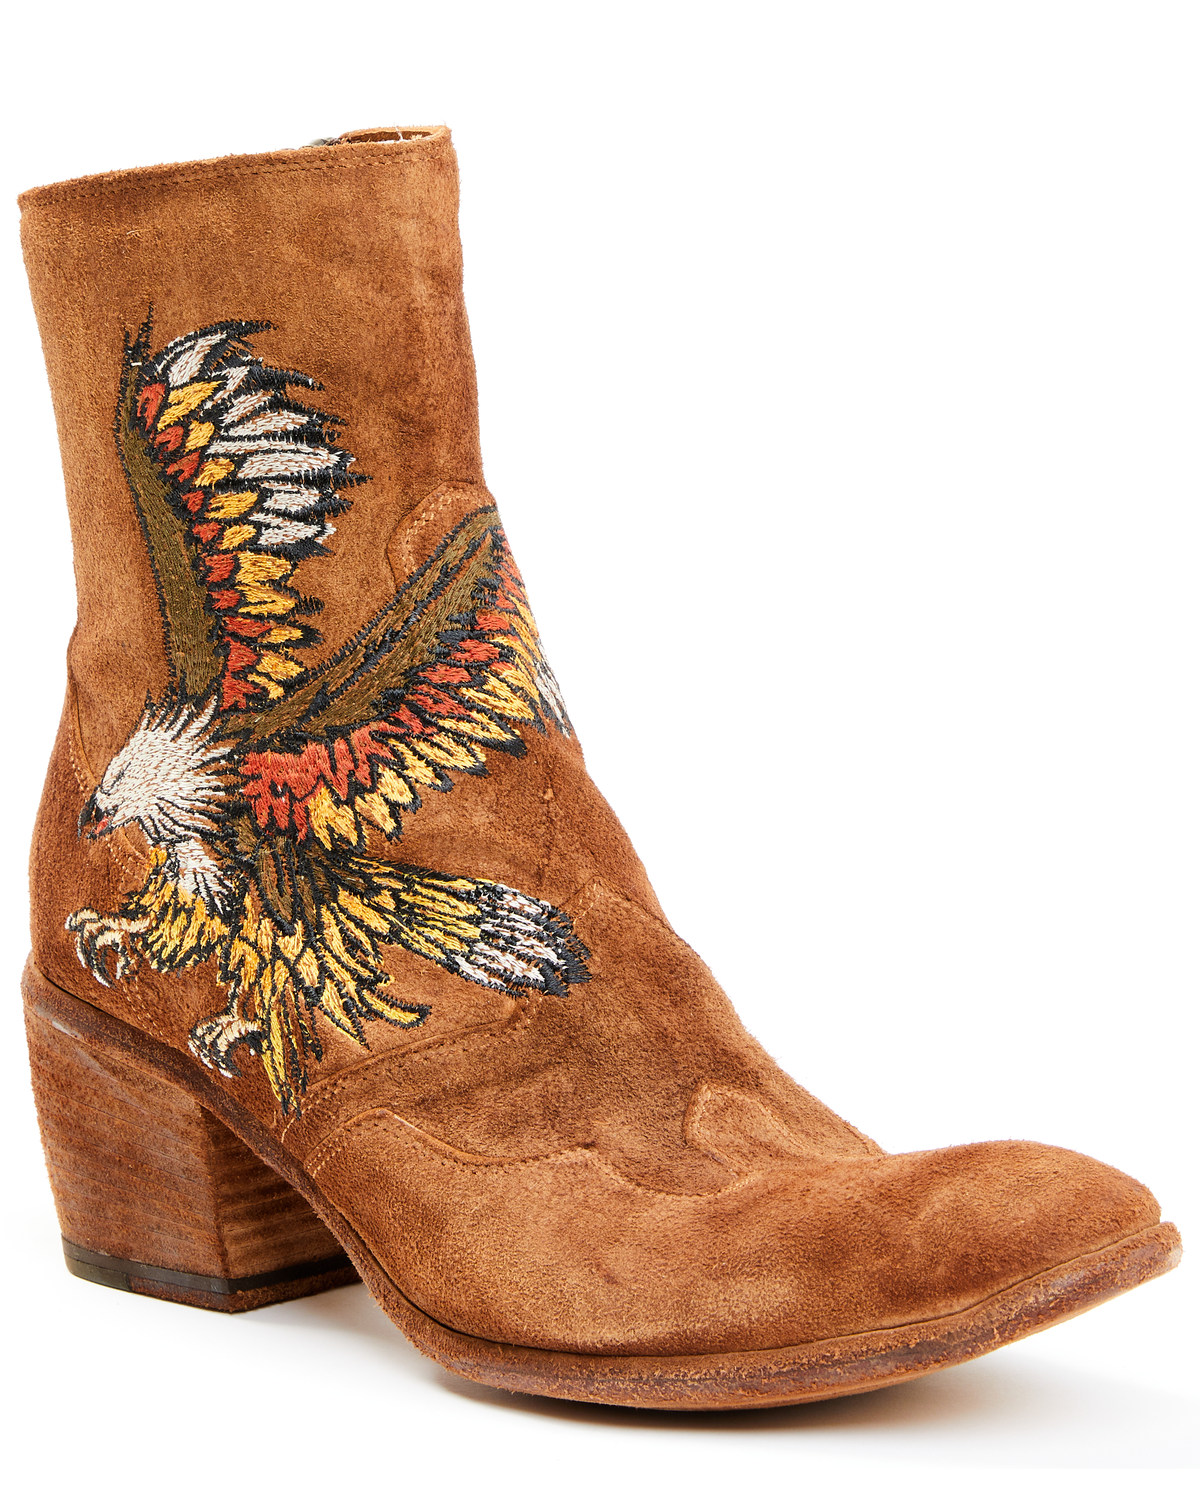 Marco Delli Women's Embroidered Eagle Fashion Booties - Round Toe